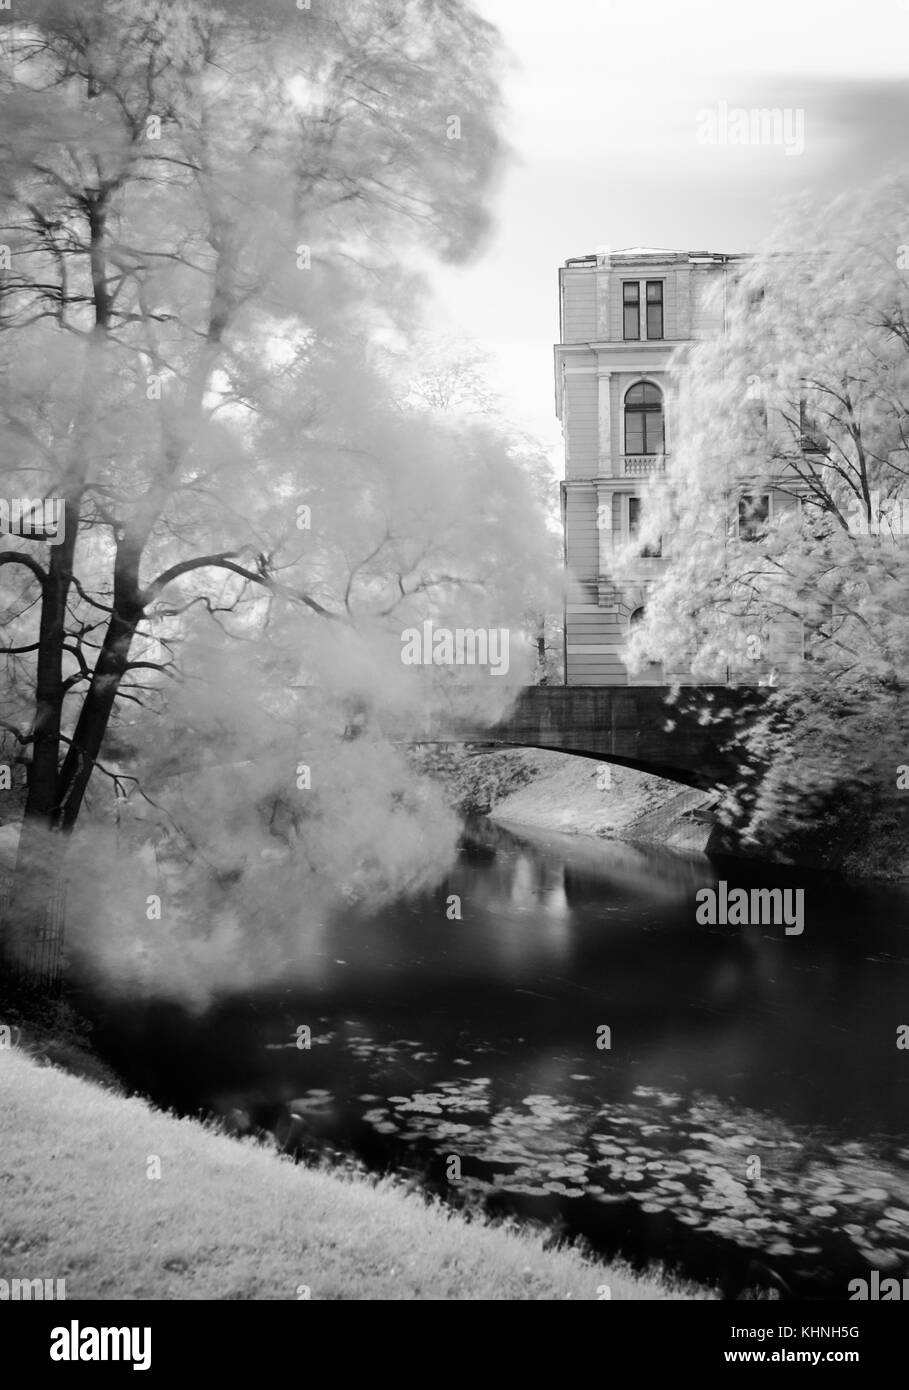 A black&white IR filter conversion of a scene in a park with a bridge over a canal, trees with soft movement in the branches and an old building. Stock Photo